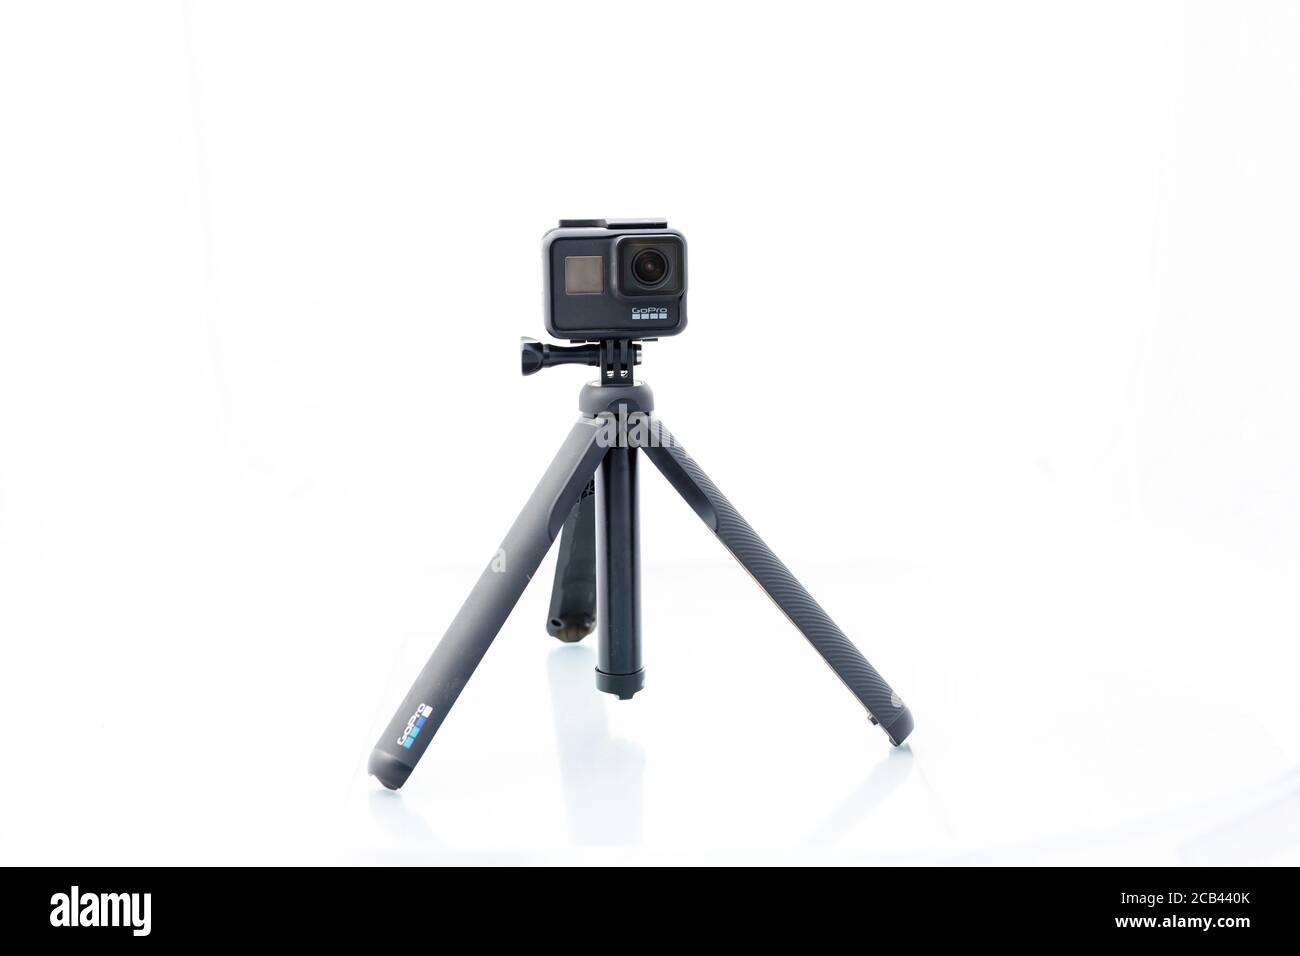 Suffolk Uk June 01 Gopro Hero 7 Black Action Camera Shot Against A Clean Plain White Background Gopro Is A Small Action Camera Commonly Used I Stock Photo Alamy